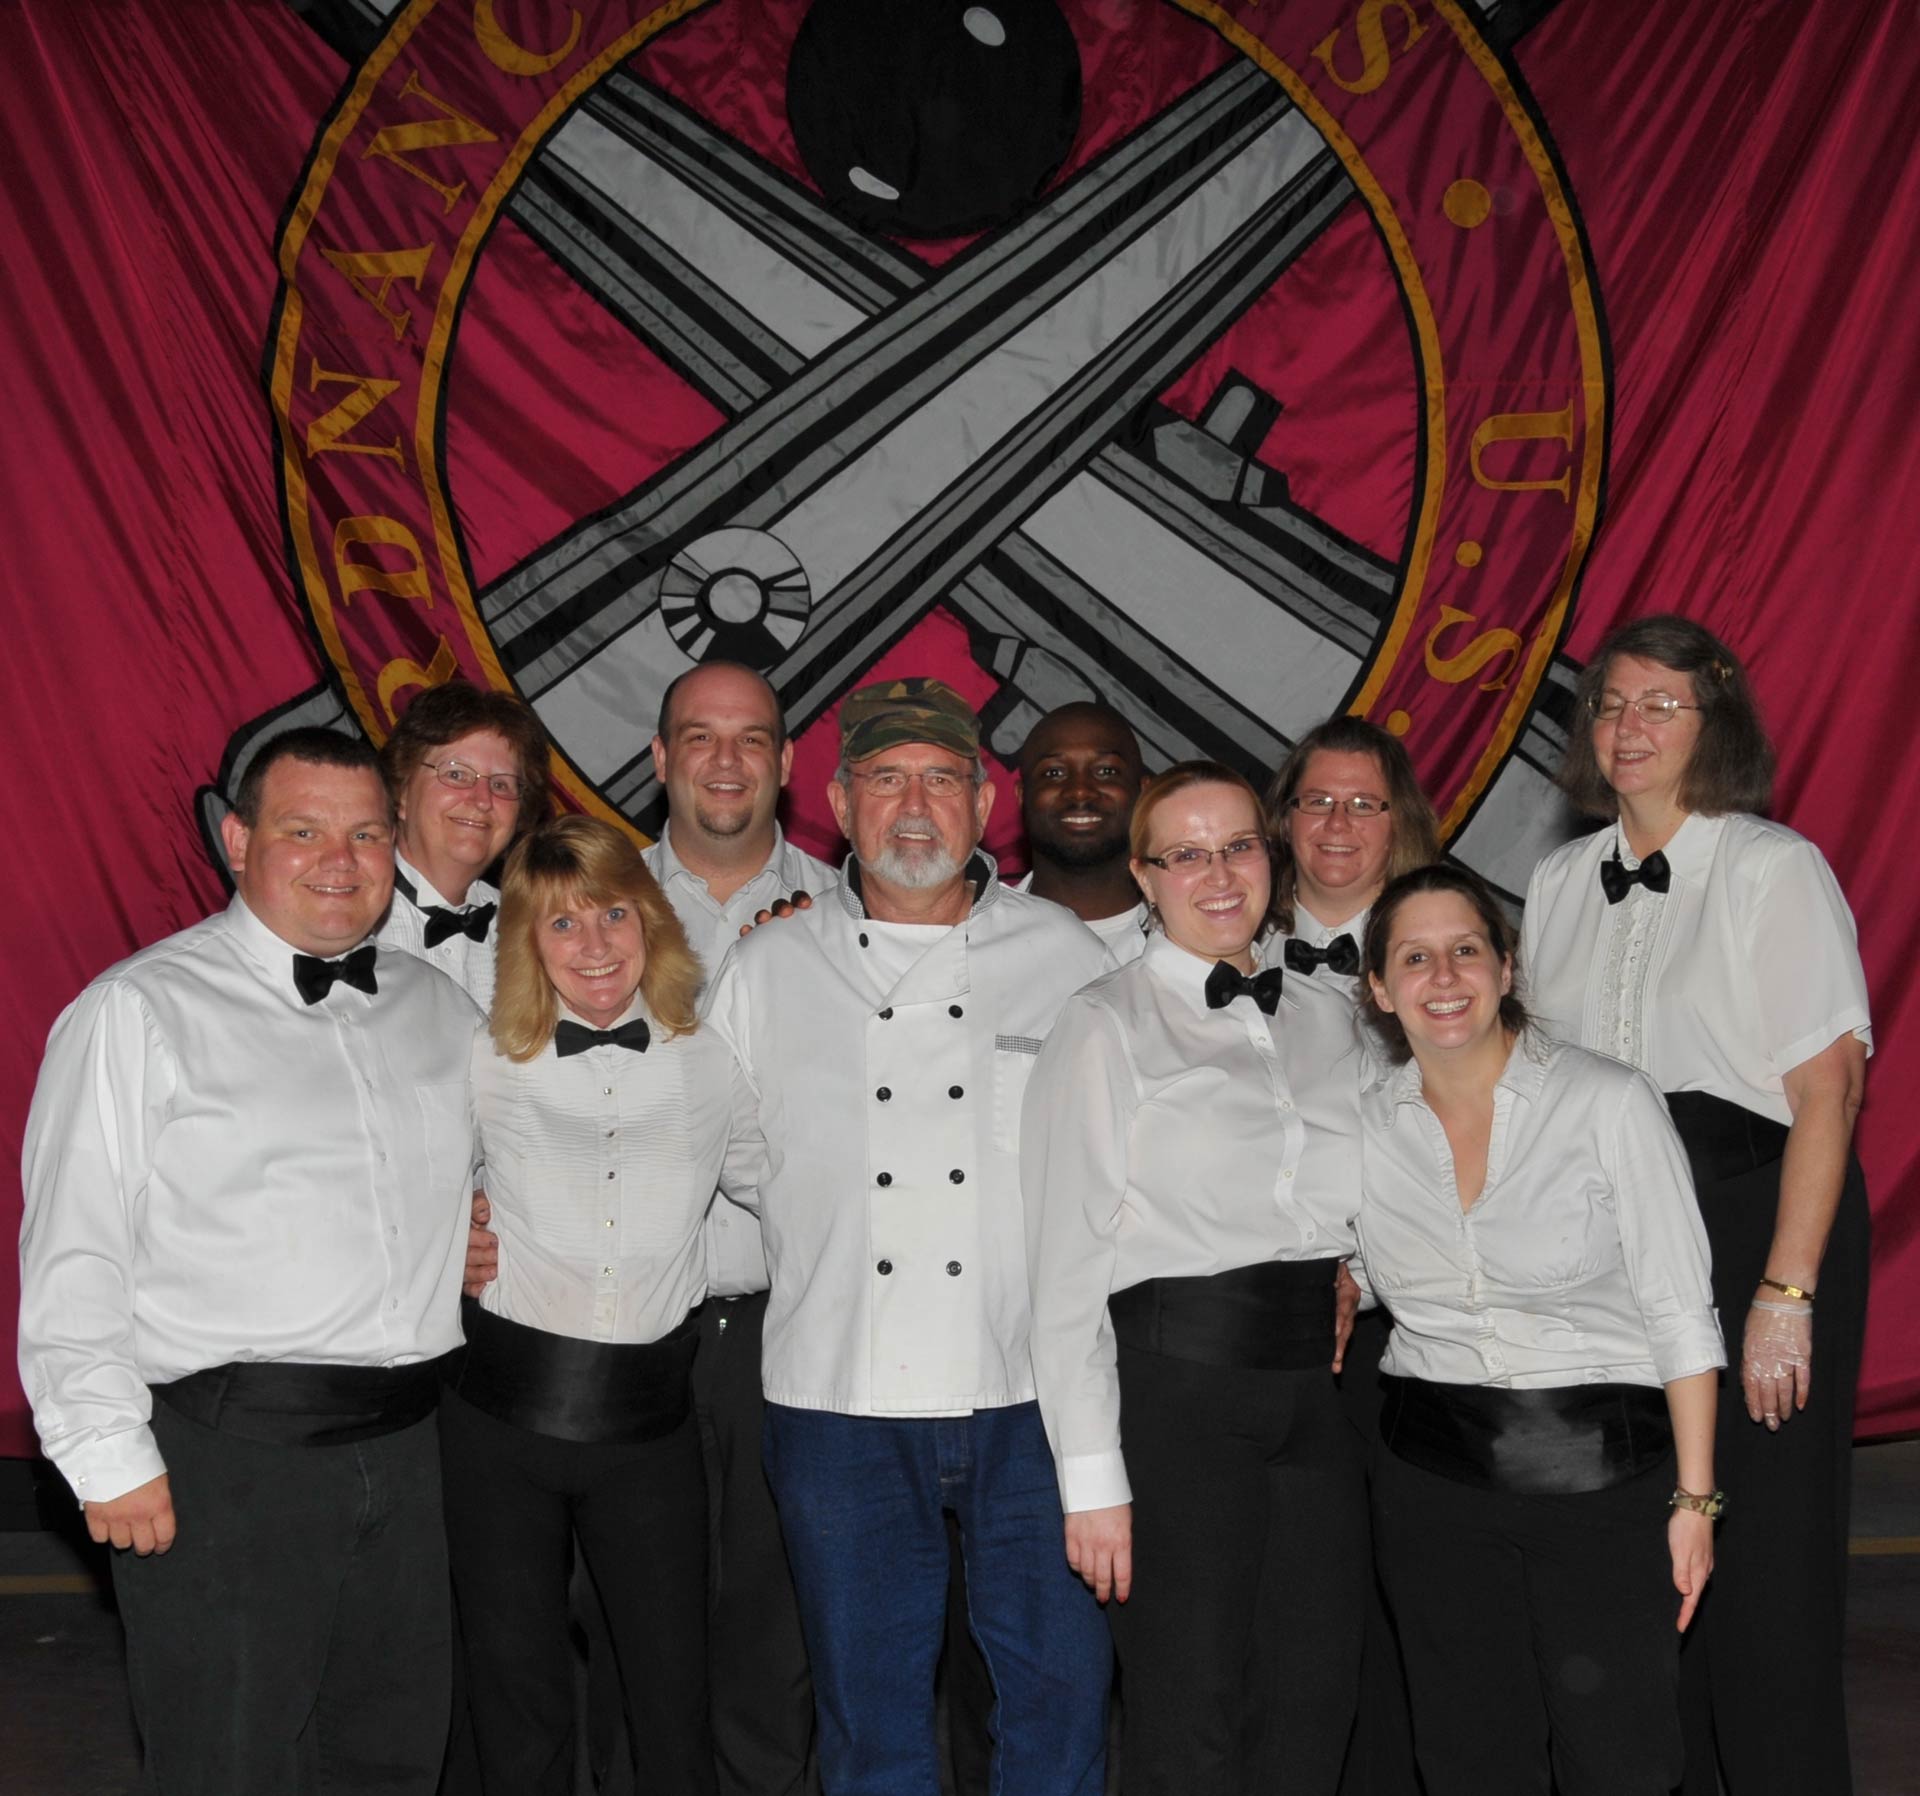 Our professional catering staff at the banquet hall